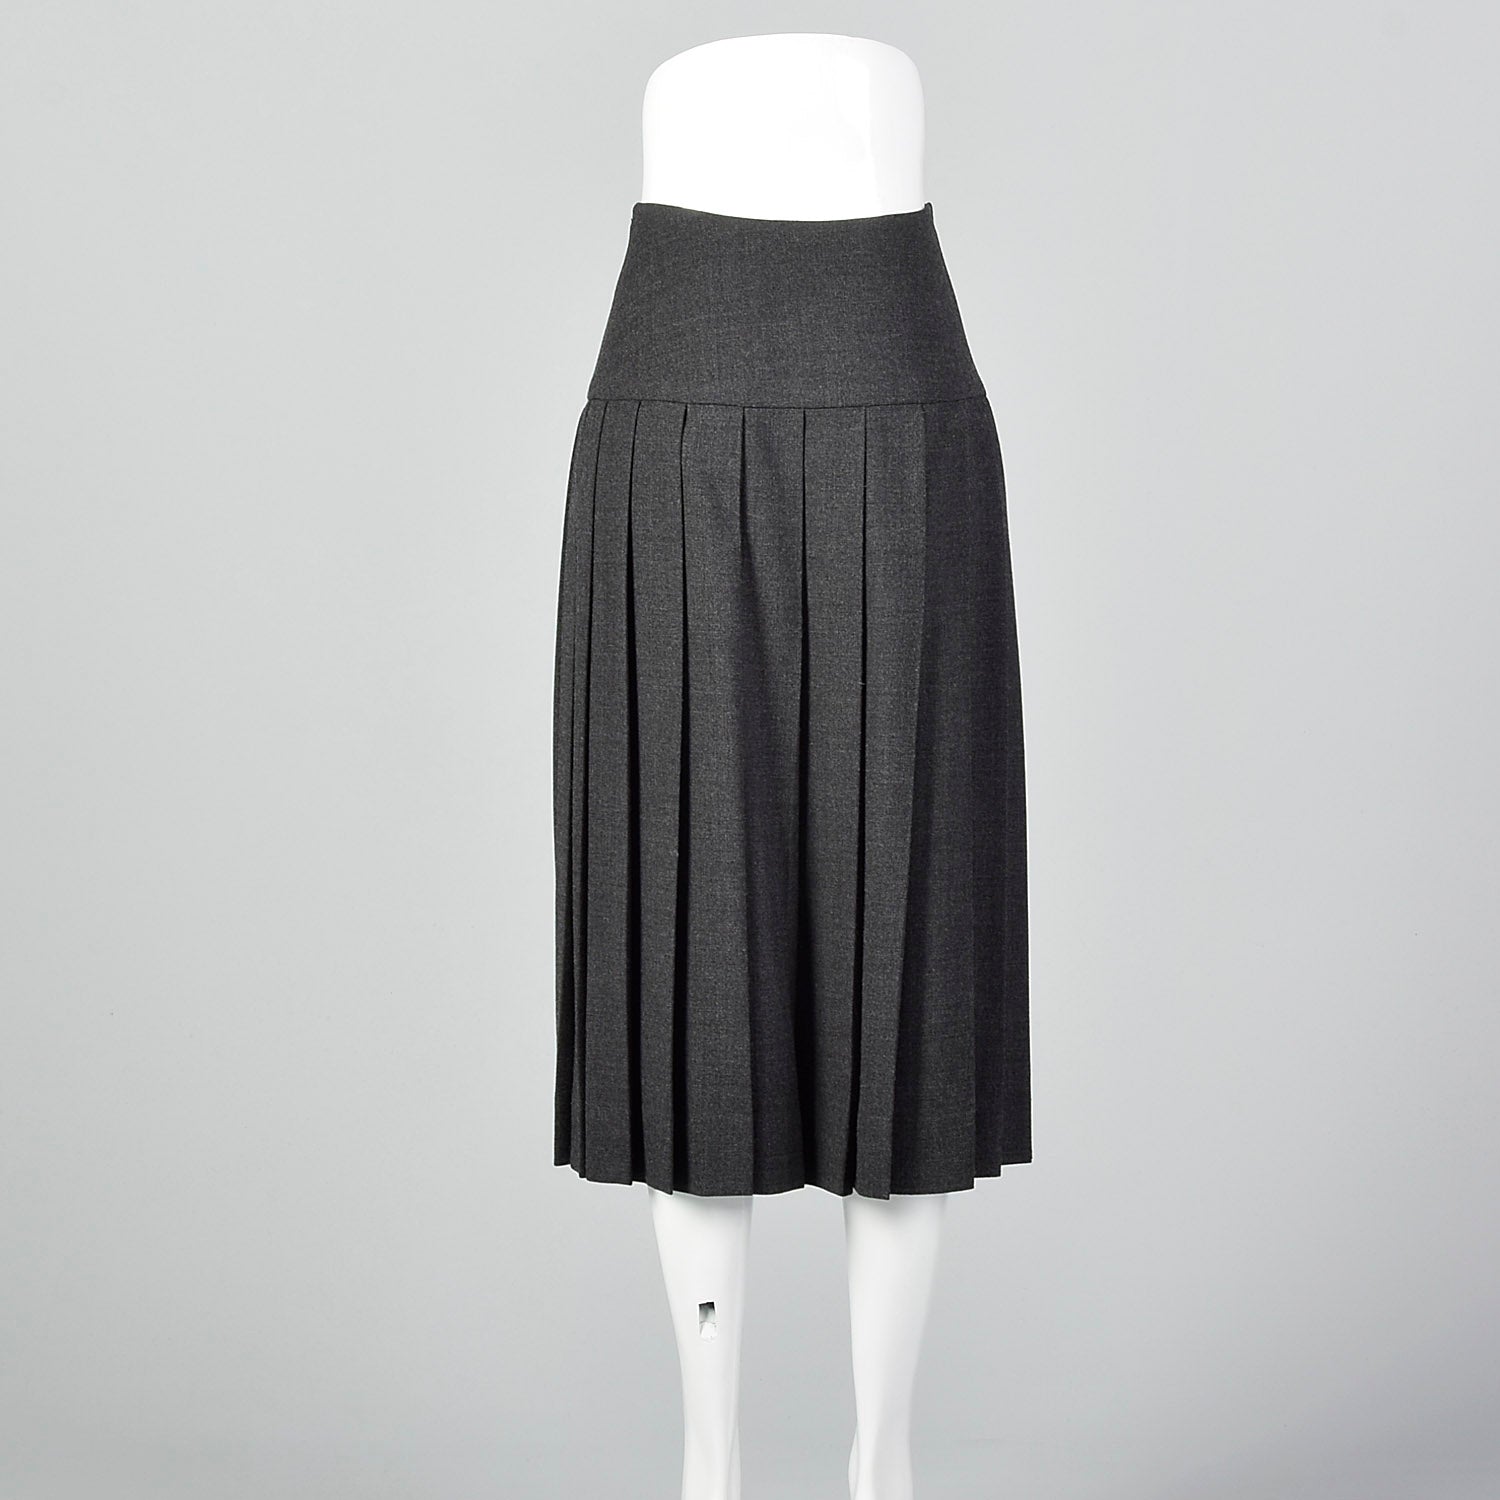 Small Chanel Boutique 1990s Gray Pleated Skirt